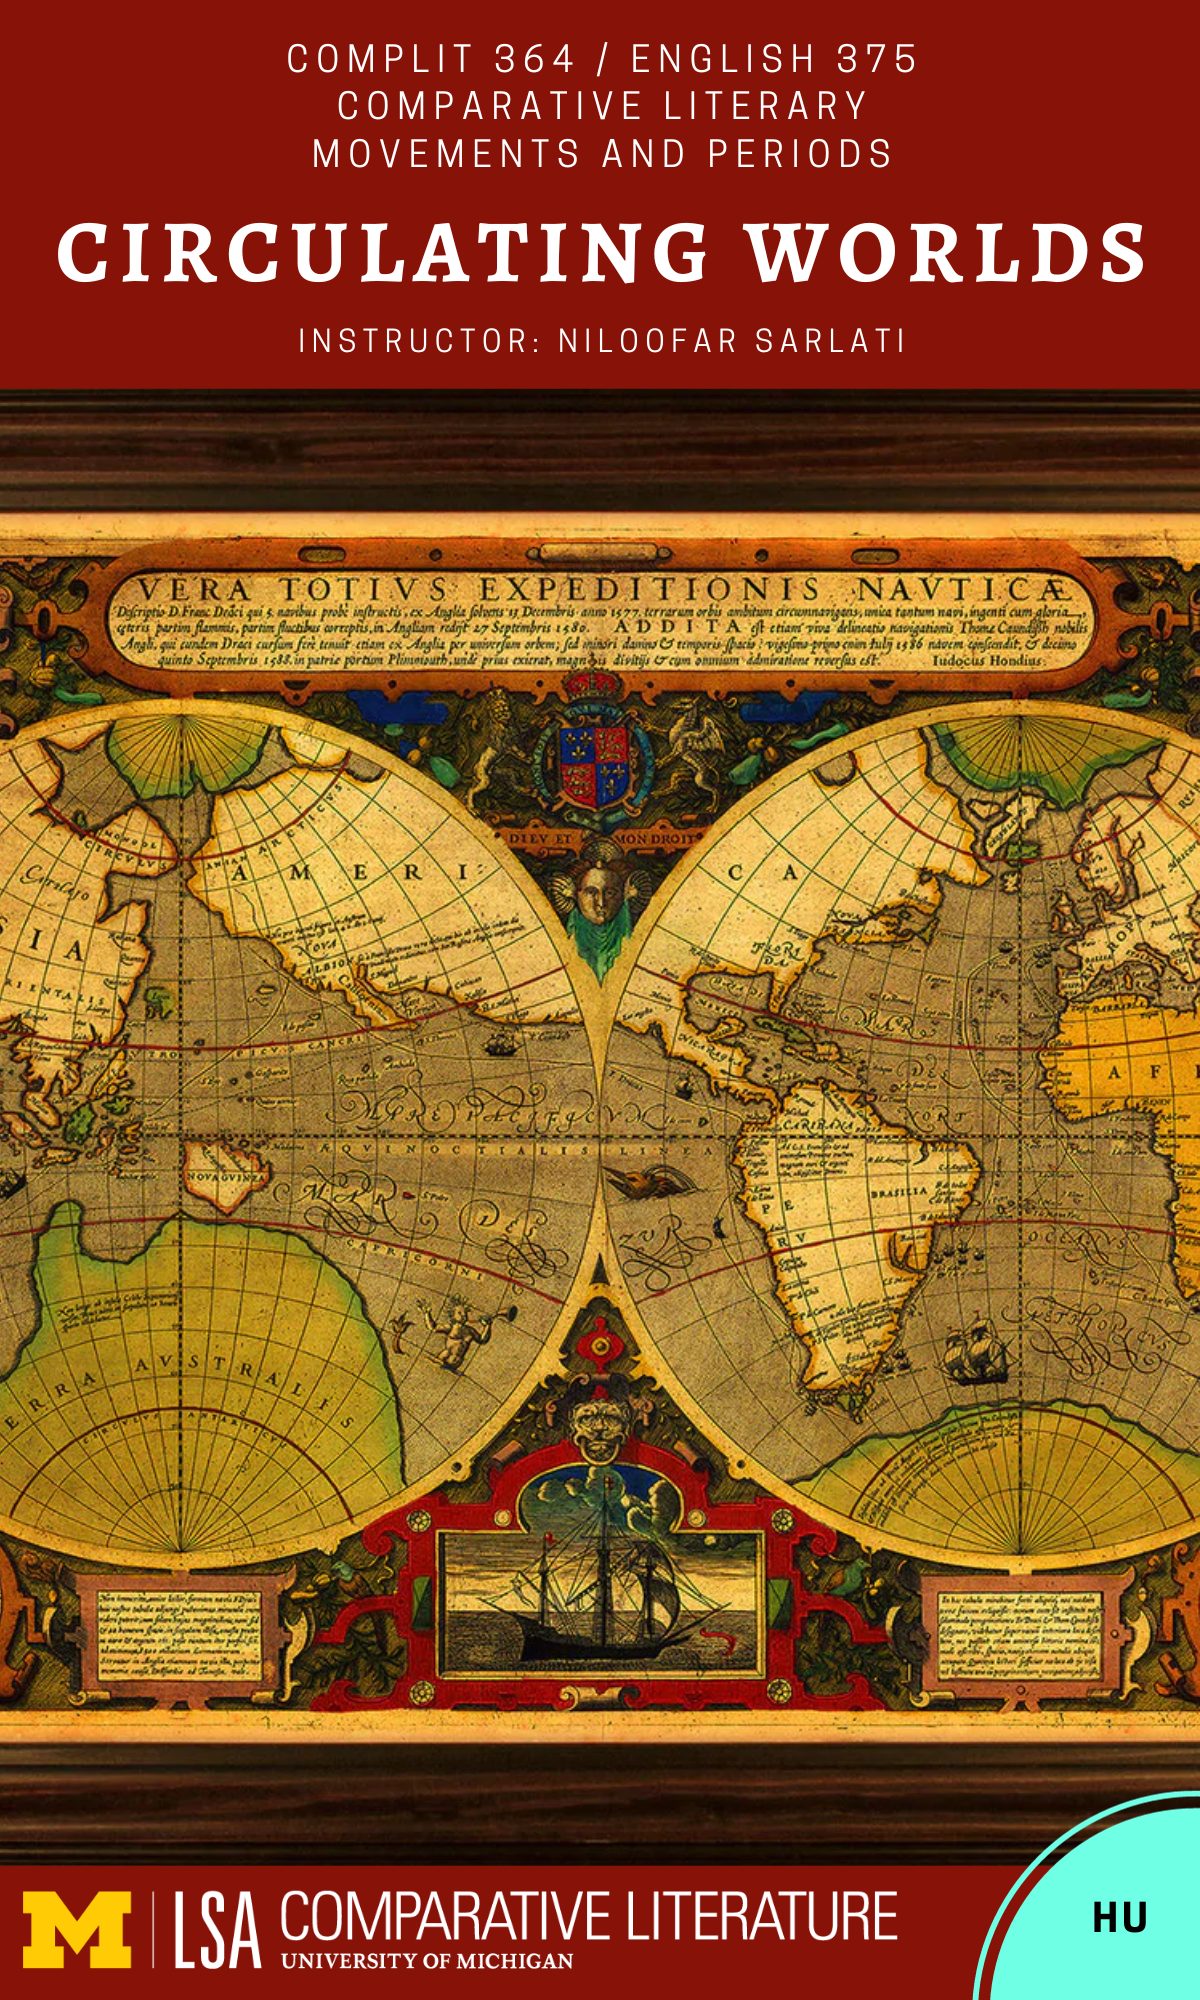 Old fashioned map showing a globe cut into two pieces